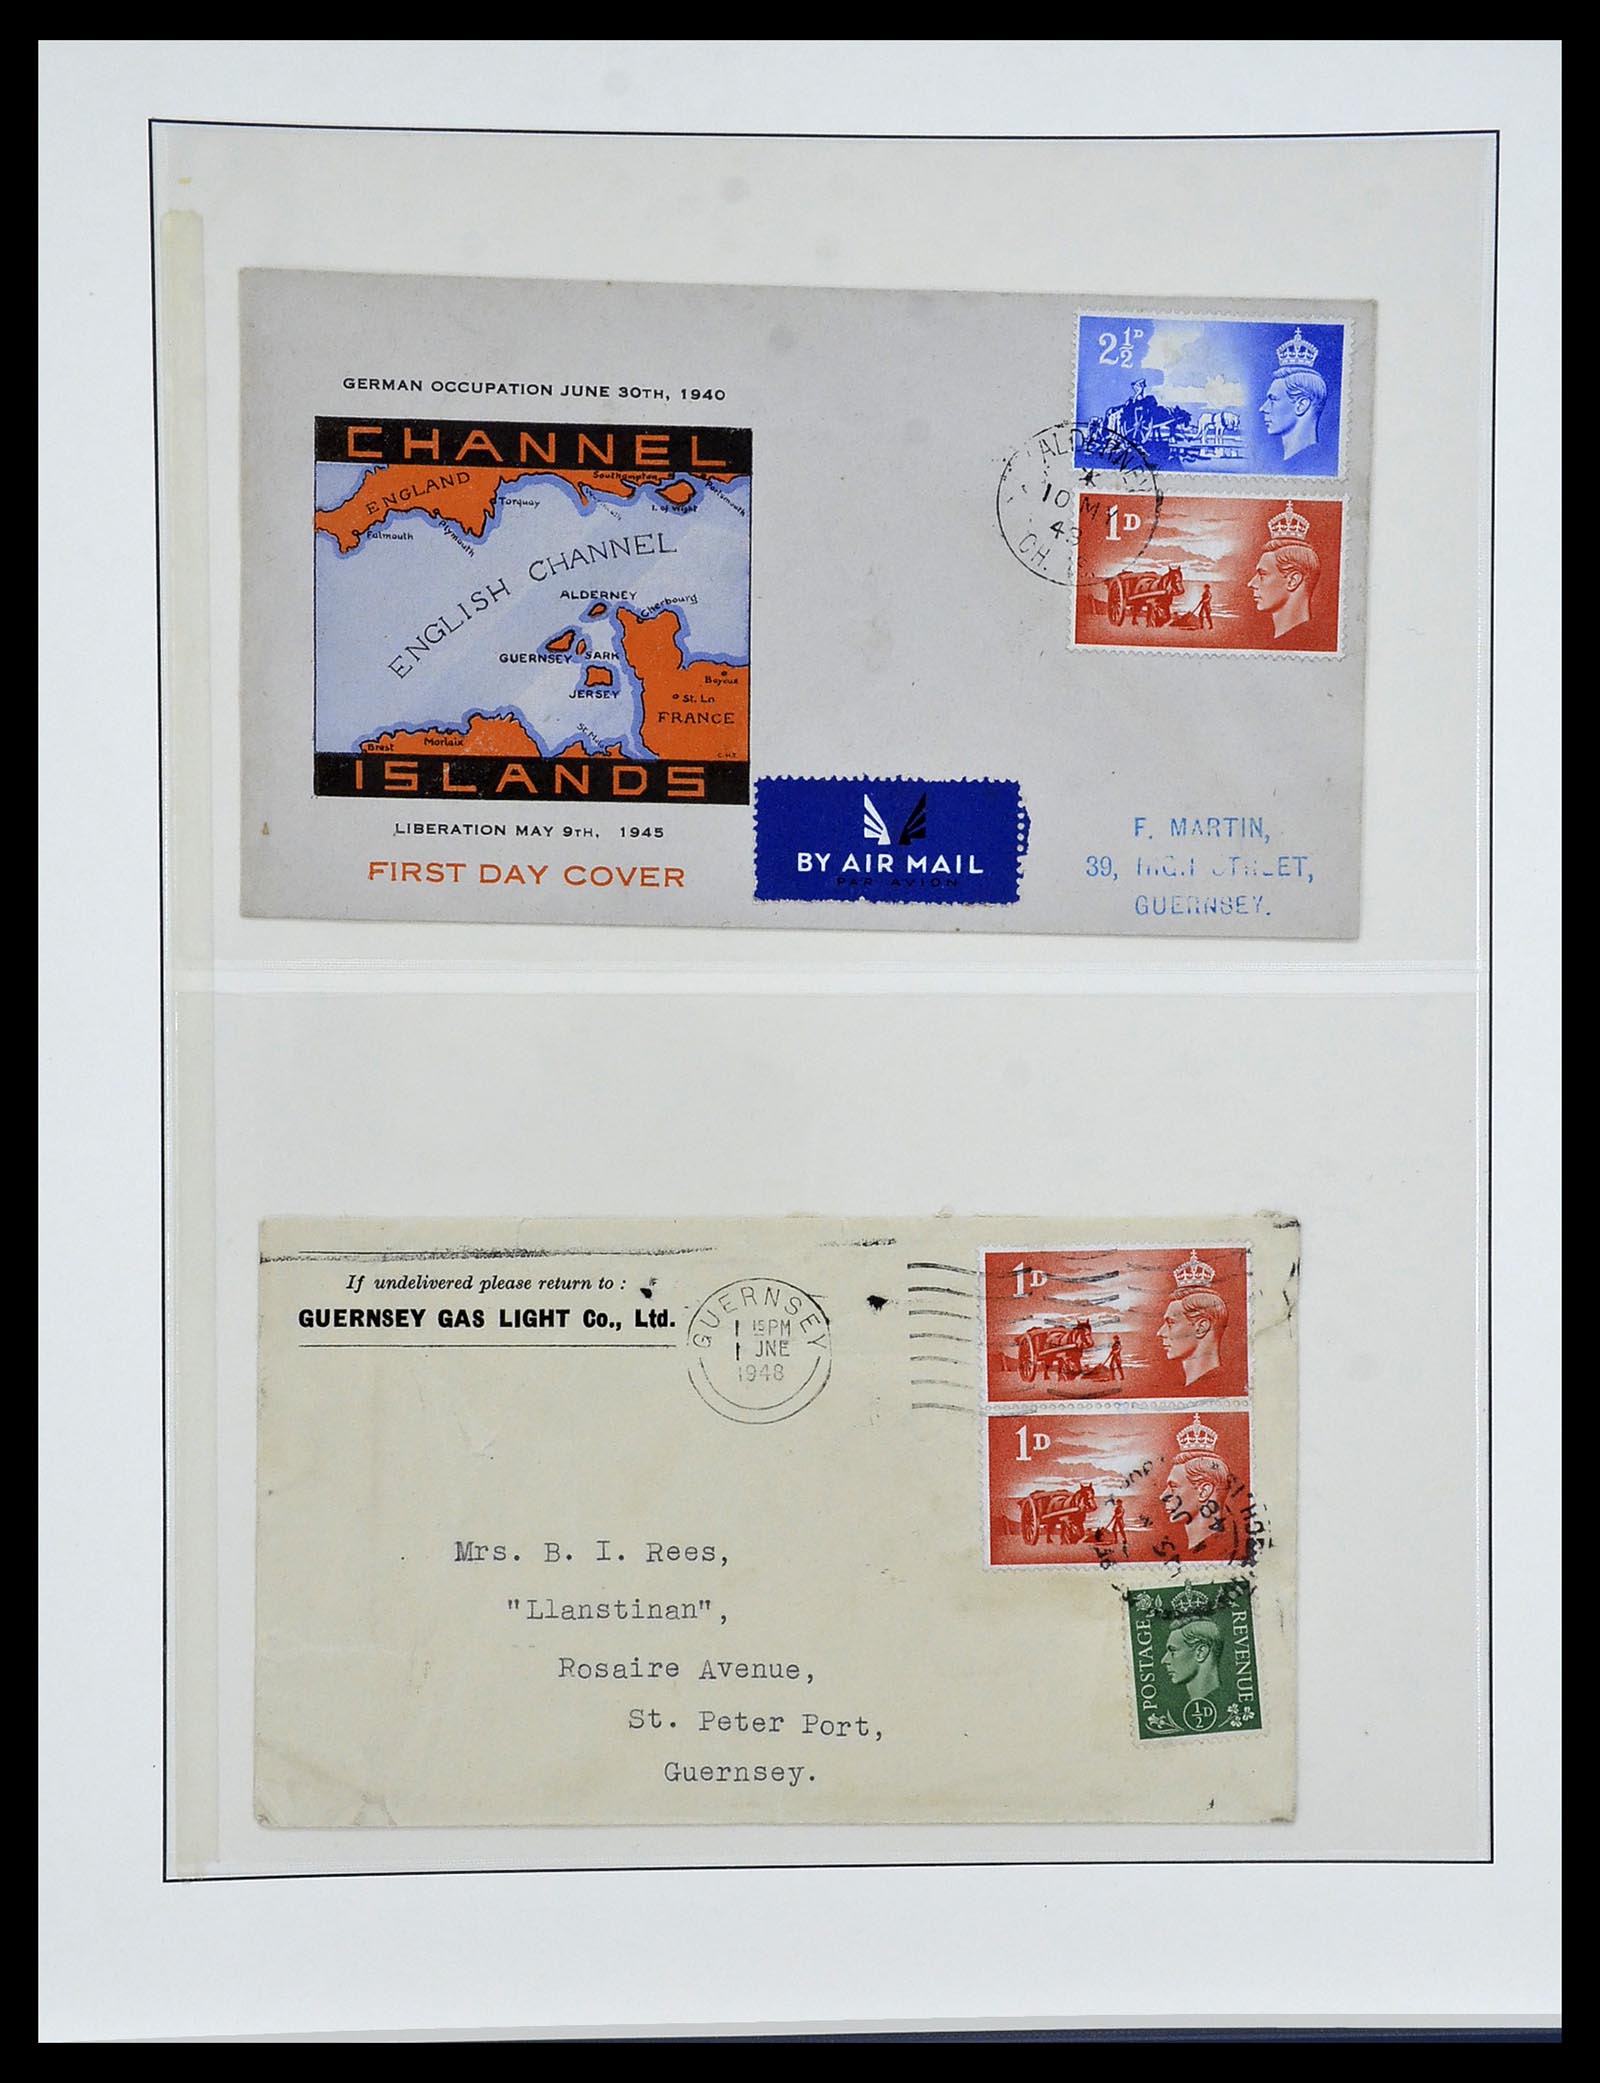 34161 035 - Stamp collection 34161 German occupation Channel Islands 1940-1945.